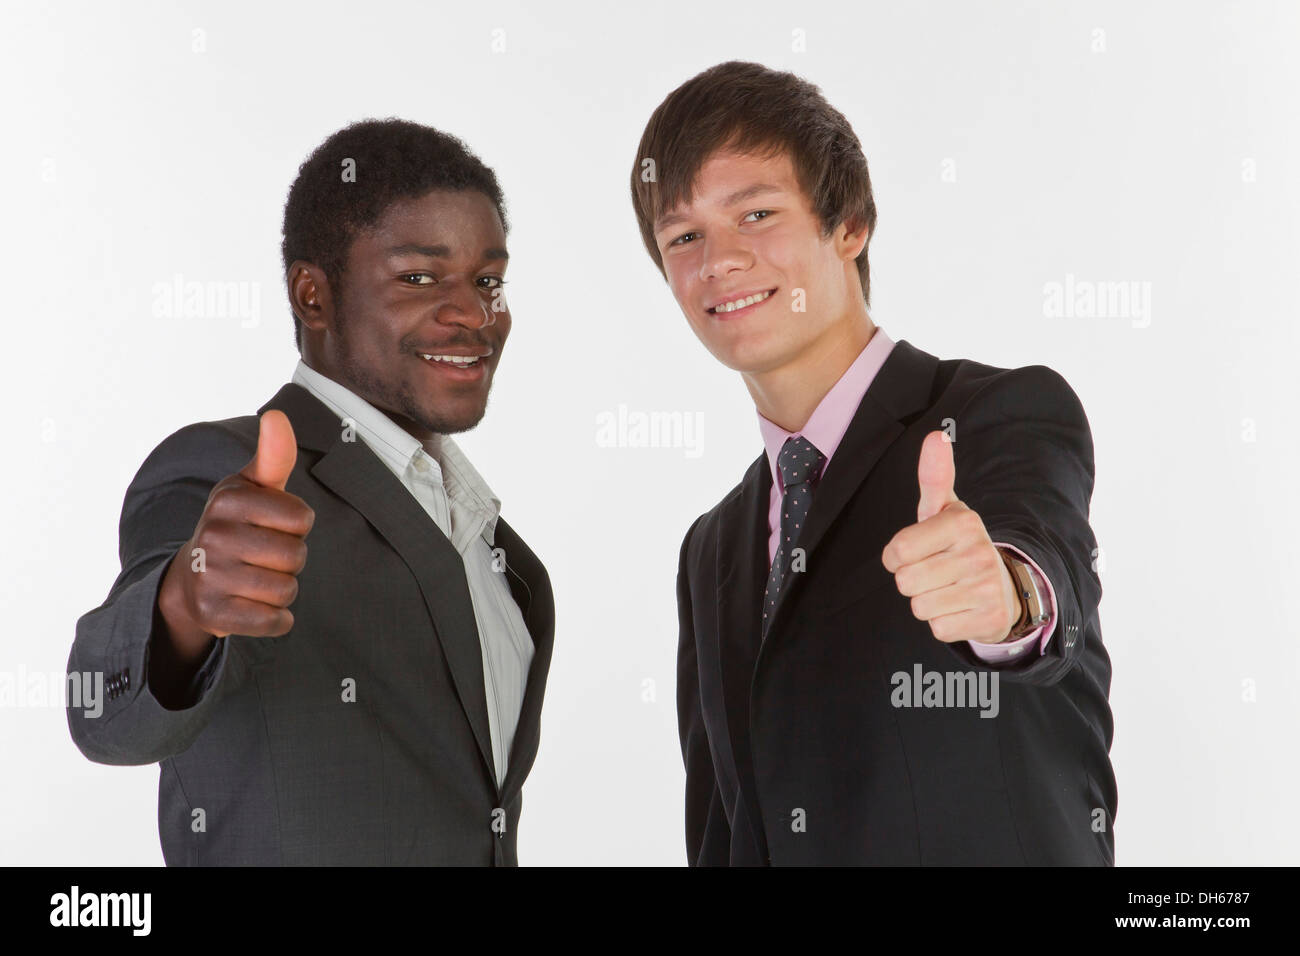 Two young businessmen making a thumbs-up gesture Stock Photo